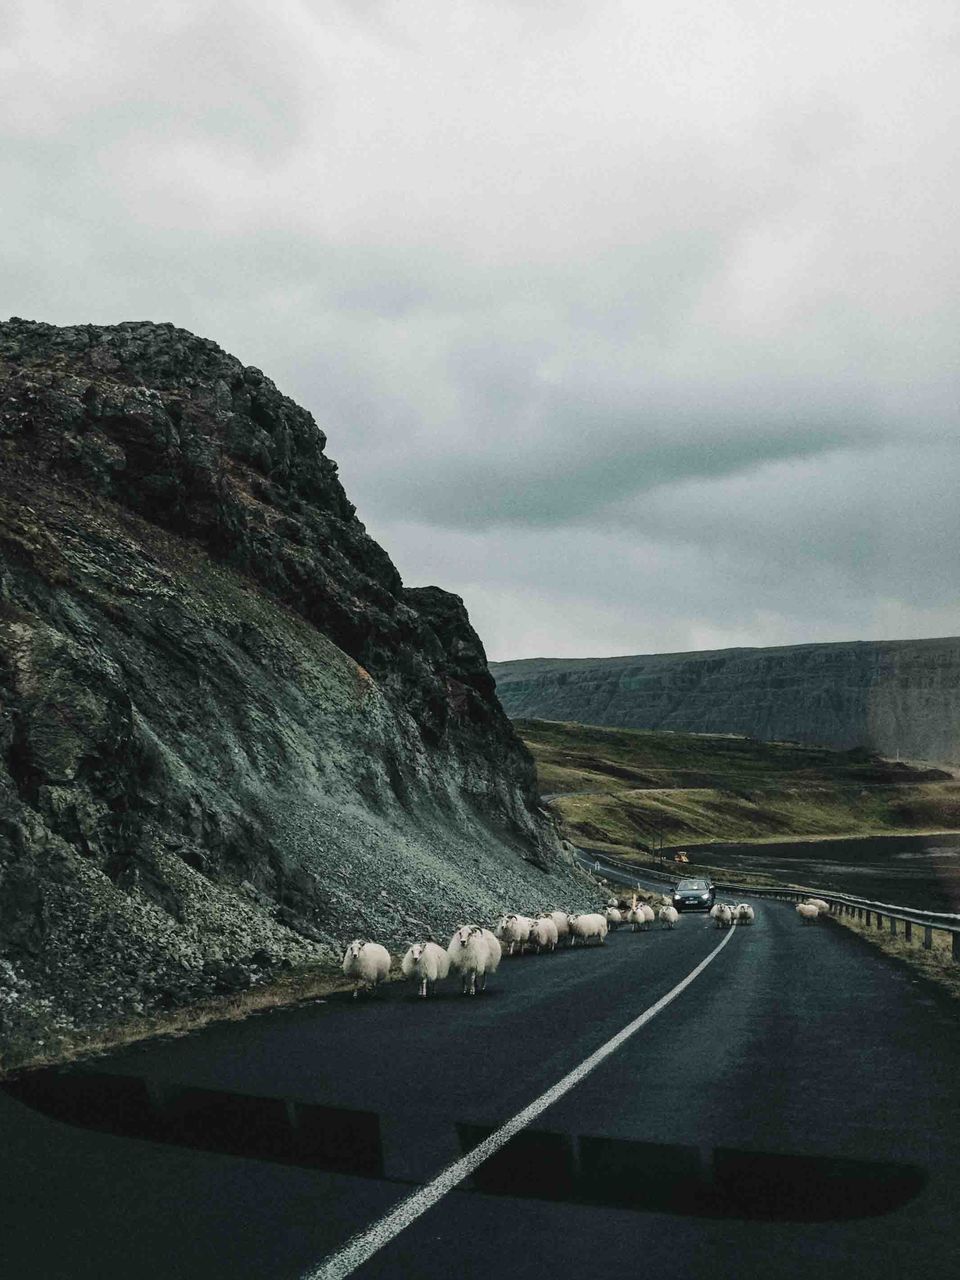 Flock of sheep on road by mountains against cloudy sky